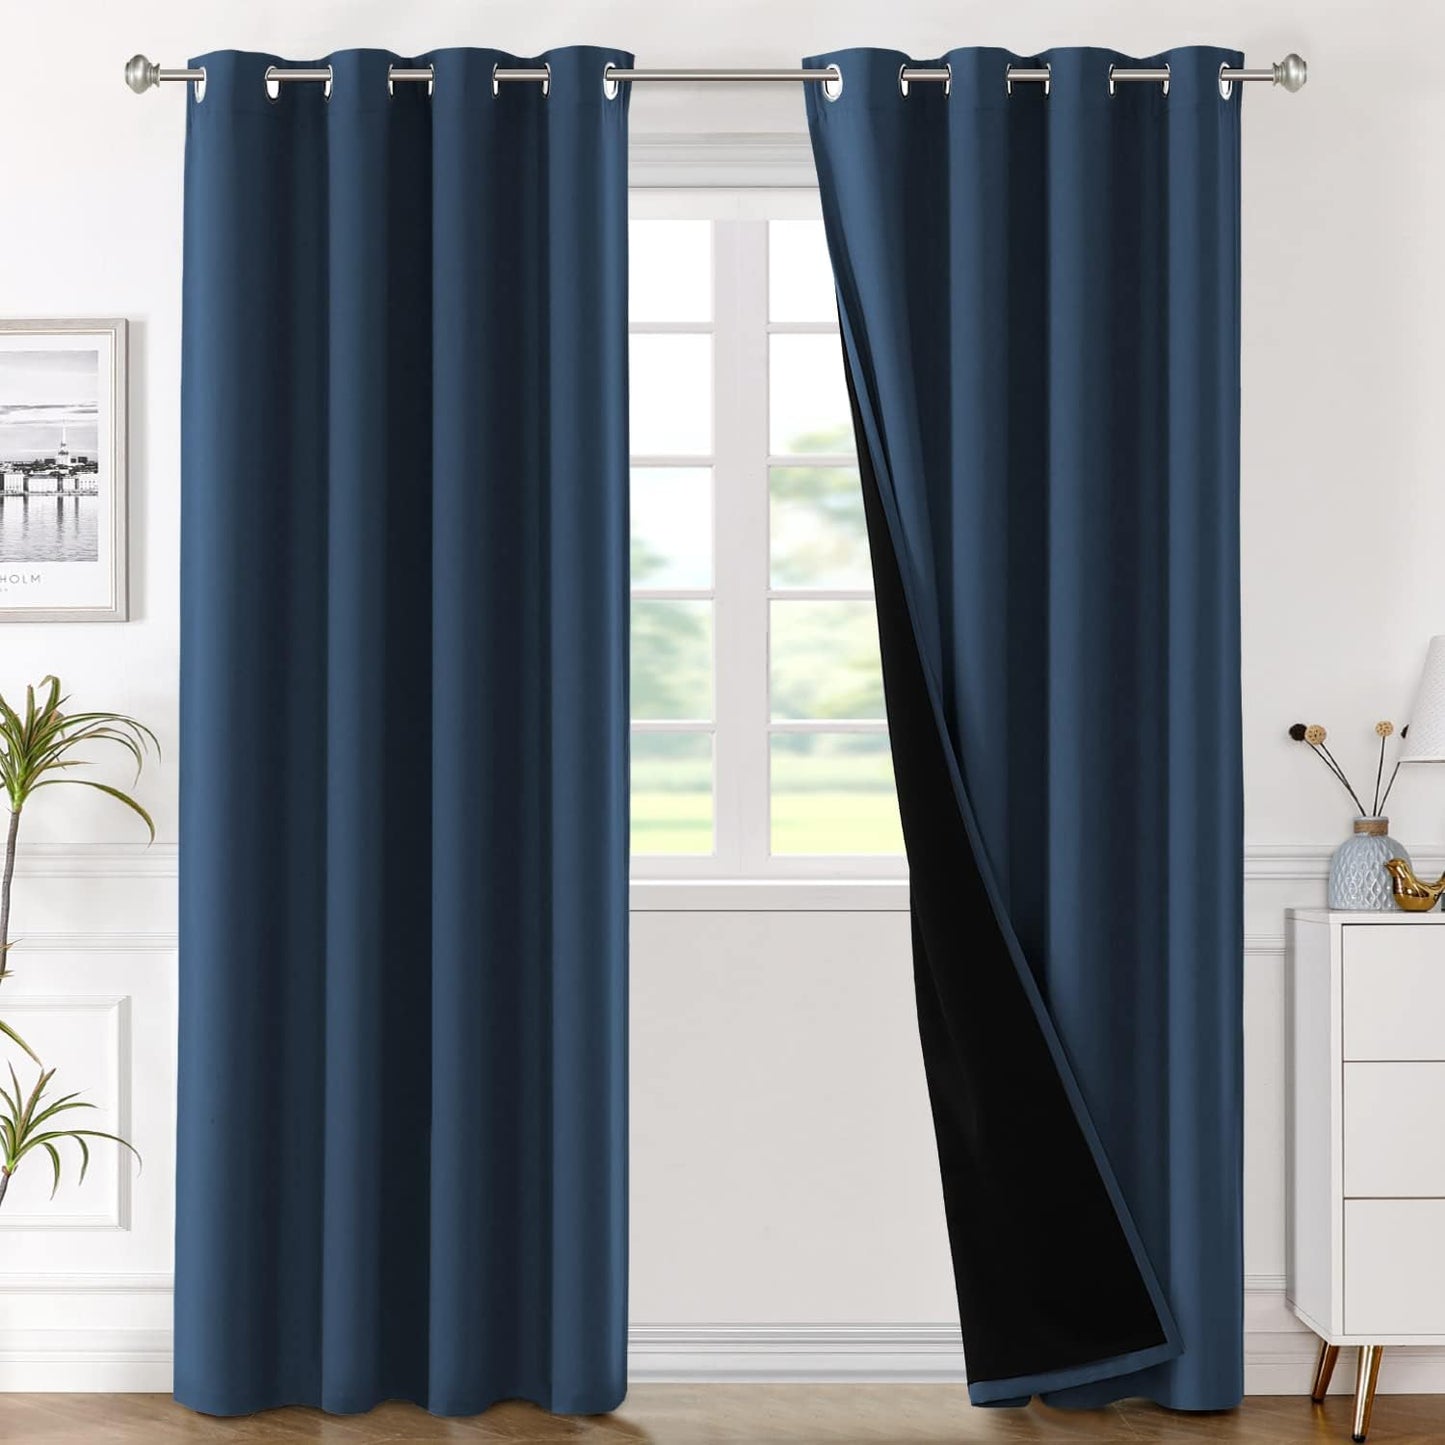 H.VERSAILTEX Blackout Curtains with Liner Backing, Thermal Insulated Curtains for Living Room, Noise Reducing Drapes, White, 52 Inches Wide X 96 Inches Long per Panel, Set of 2 Panels  H.VERSAILTEX Navy Blue 52"W X 96"L 